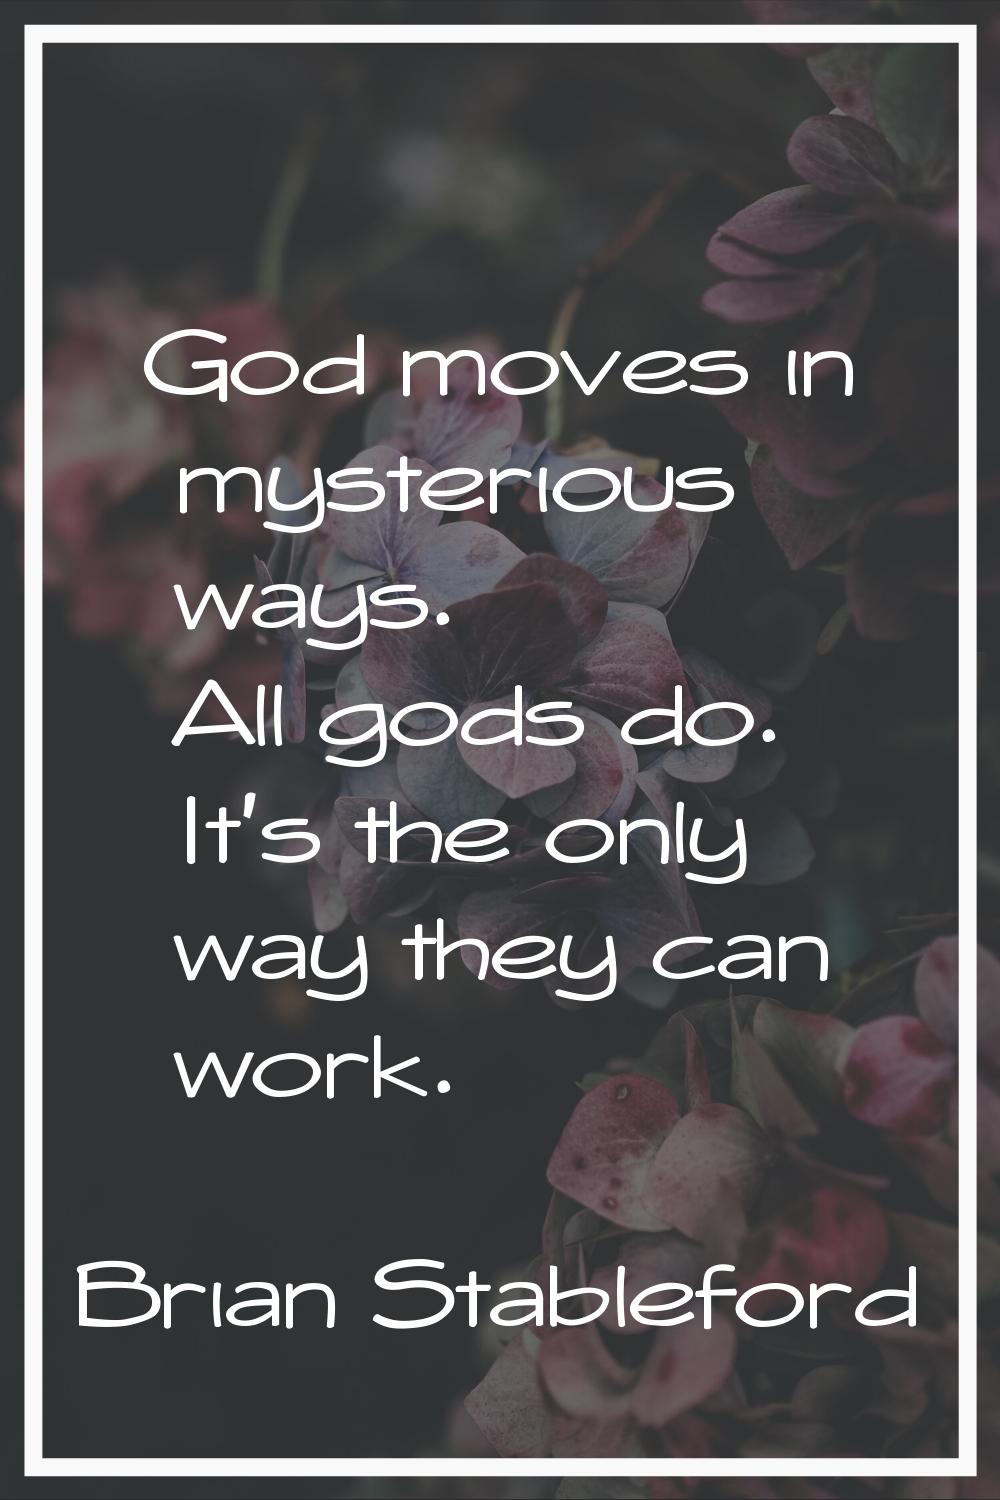 God moves in mysterious ways. All gods do. It's the only way they can work.